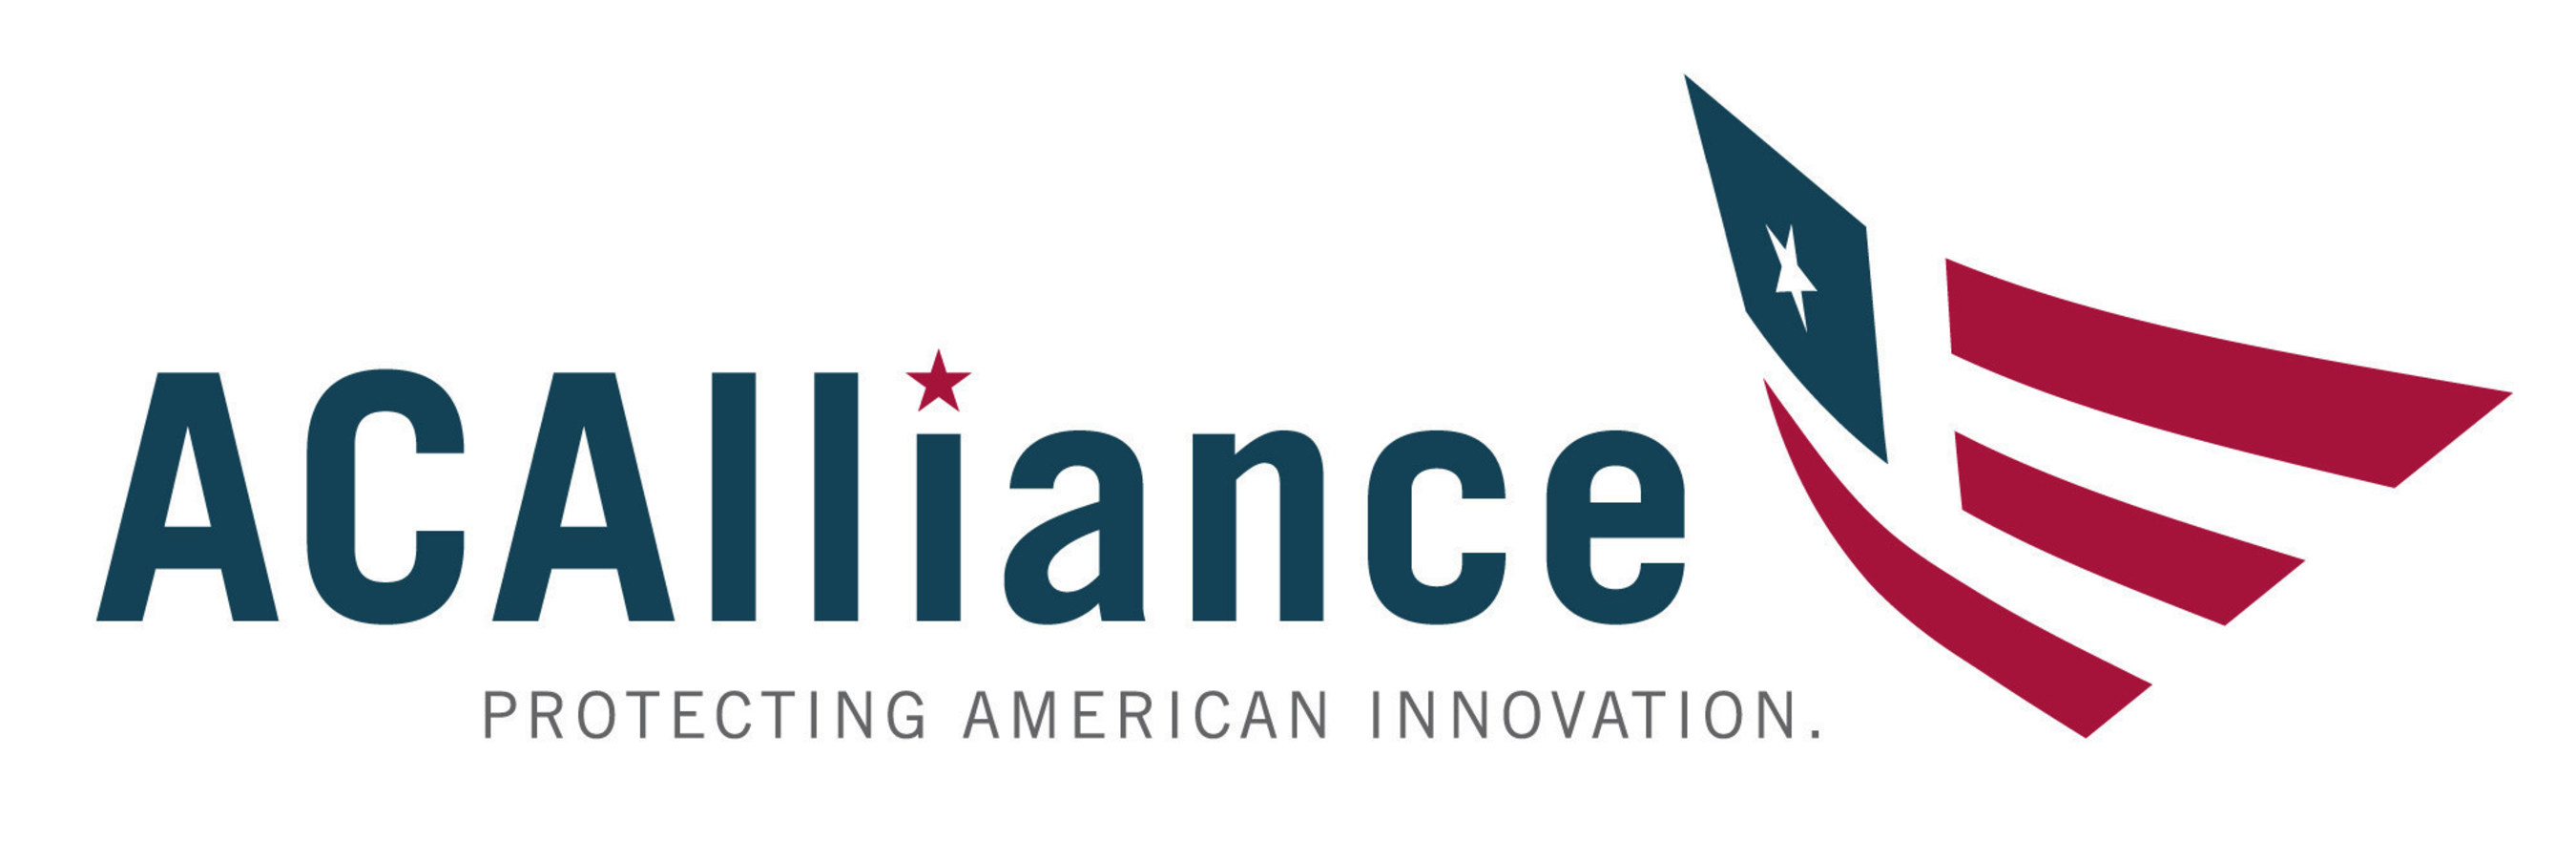 The American Competitiveness Alliance is a coalition of organizations dedicated to a modern immigration policy that ensures America's global competitiveness by attracting and keeping talent and know-how here in the United States.